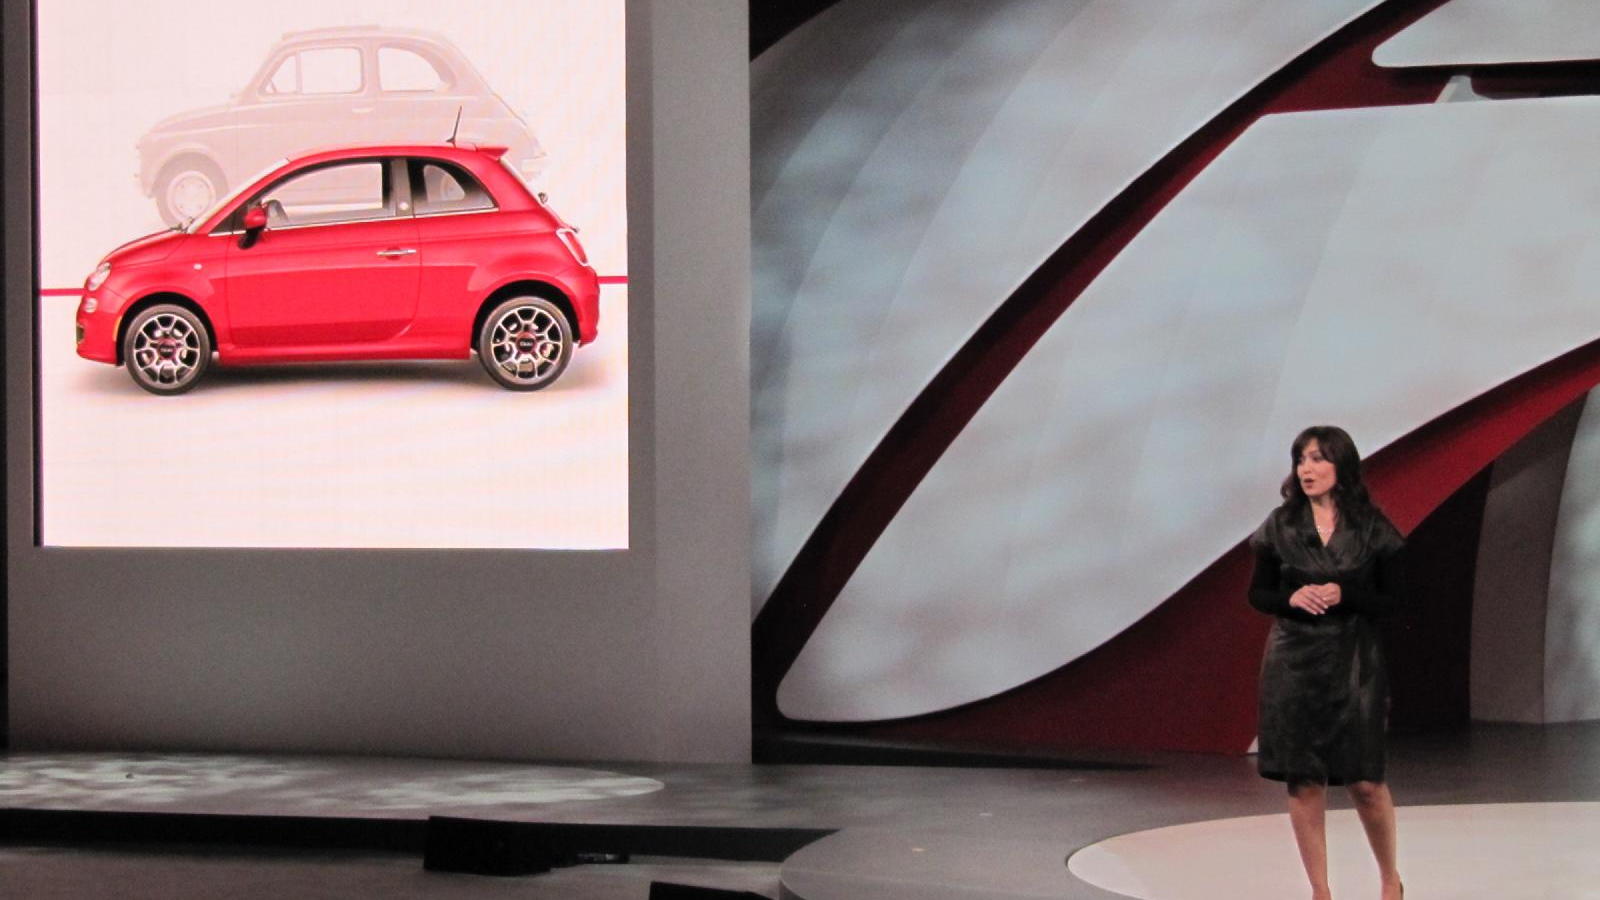 2011 Fiat 500 launch event at the 2010 Los Angeles Auto Show, November 2010